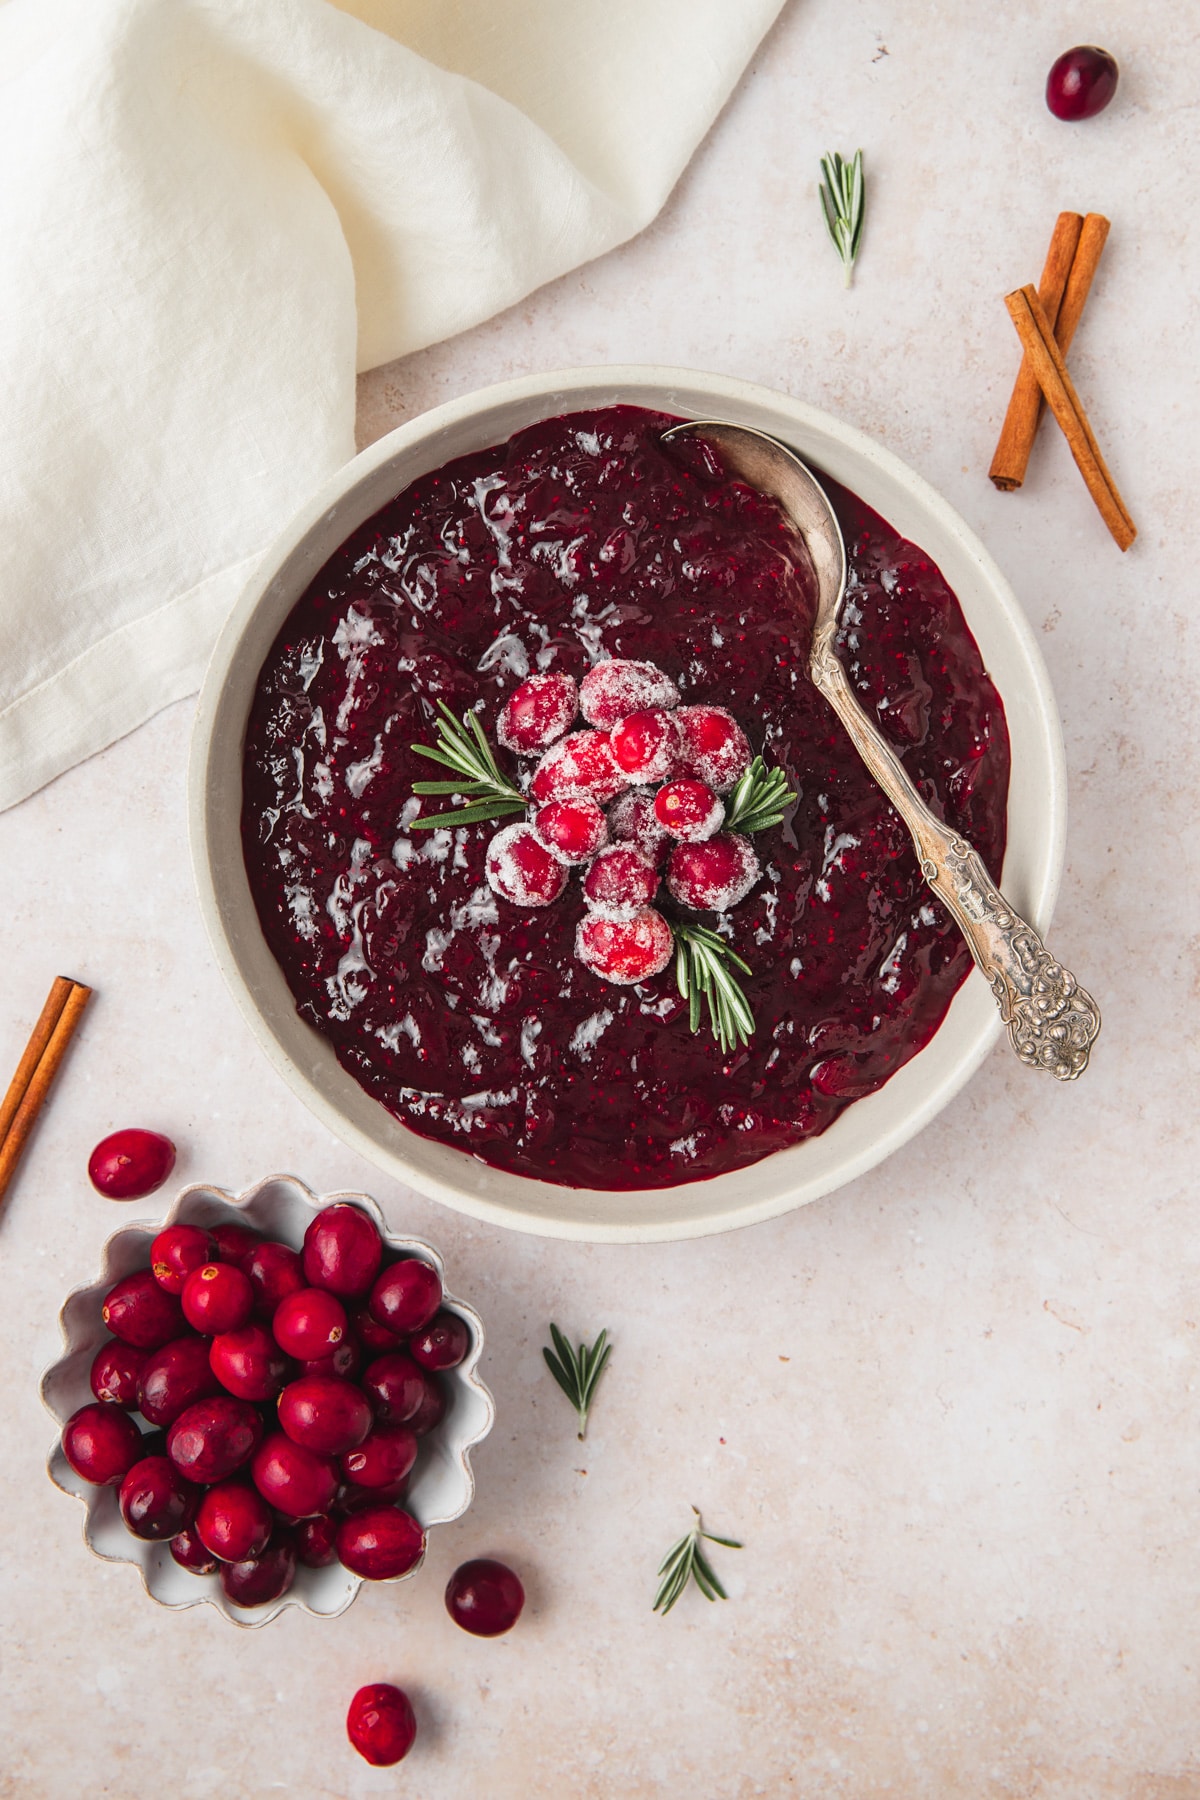 homemade cinnamon cranberry sauce with sugared cranberries on top!